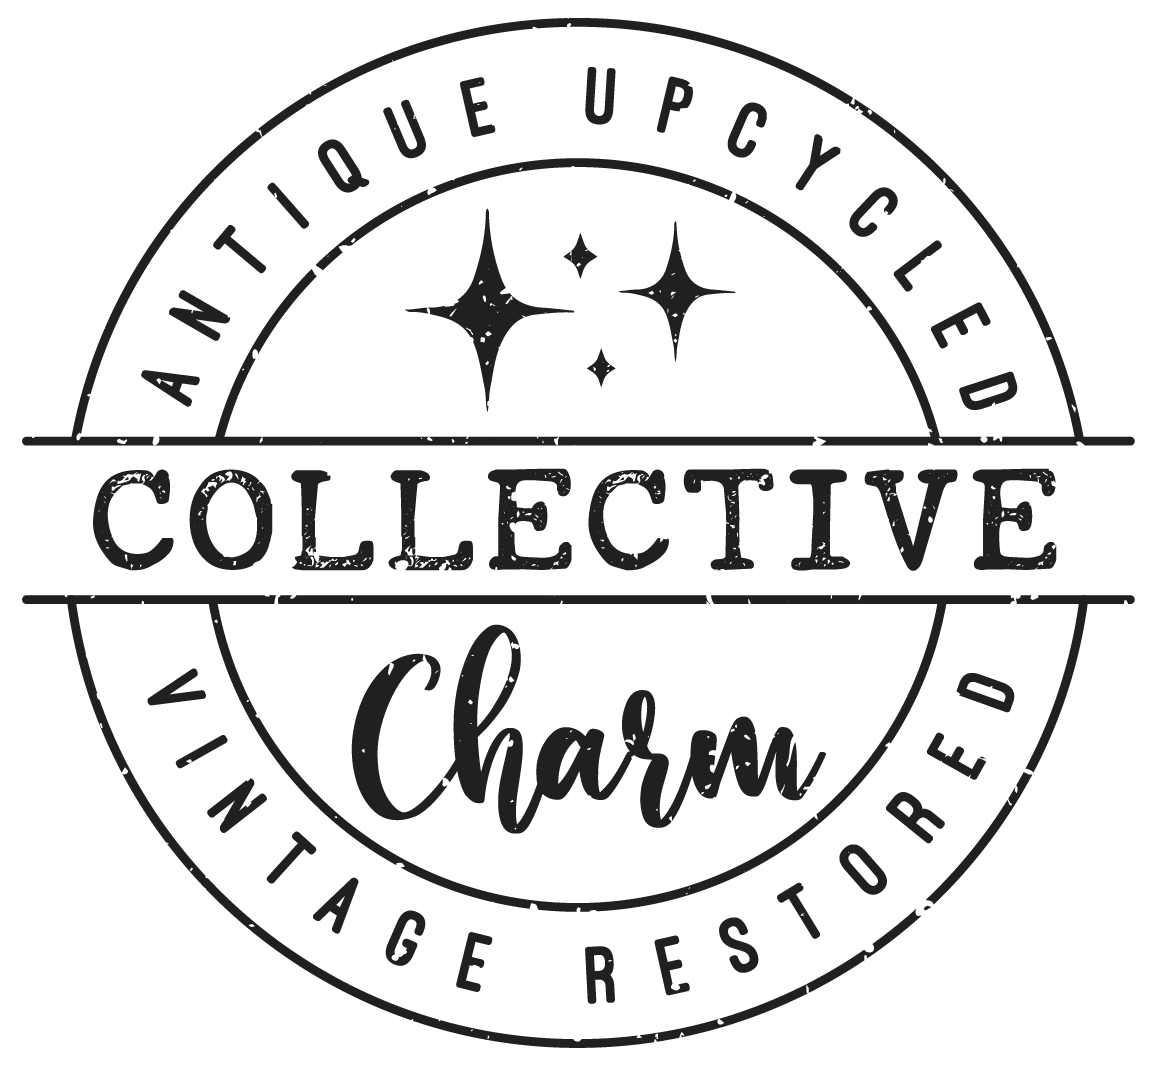 The Collective Charm